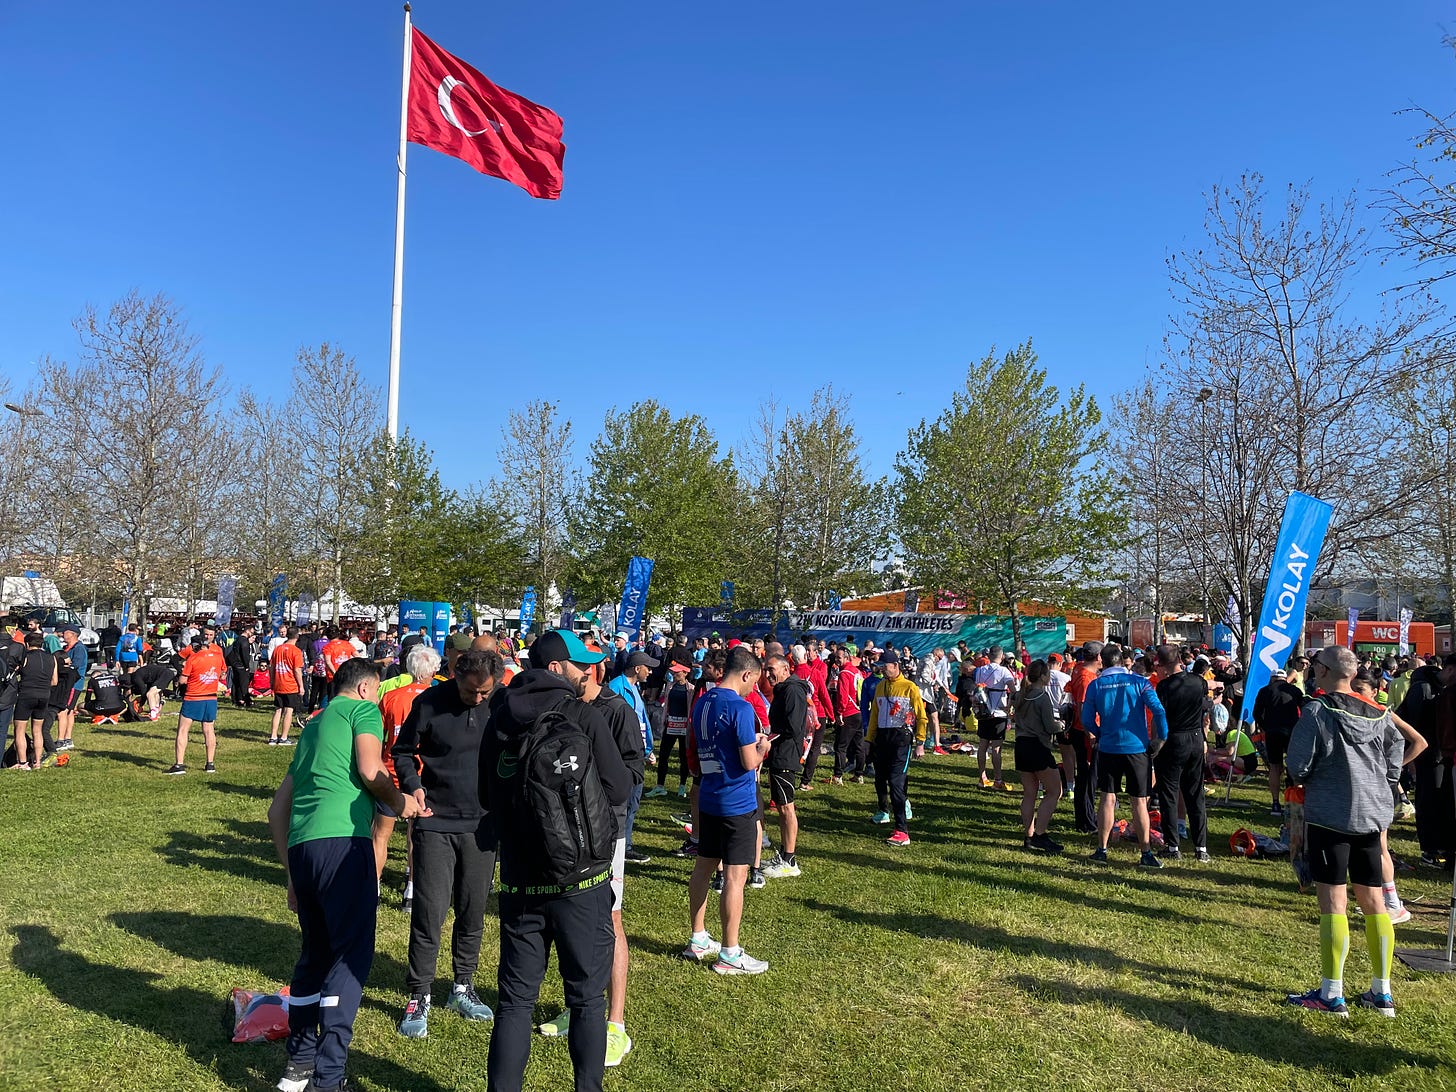 Runners gathering in the start area of the Istanbul Half Marathon